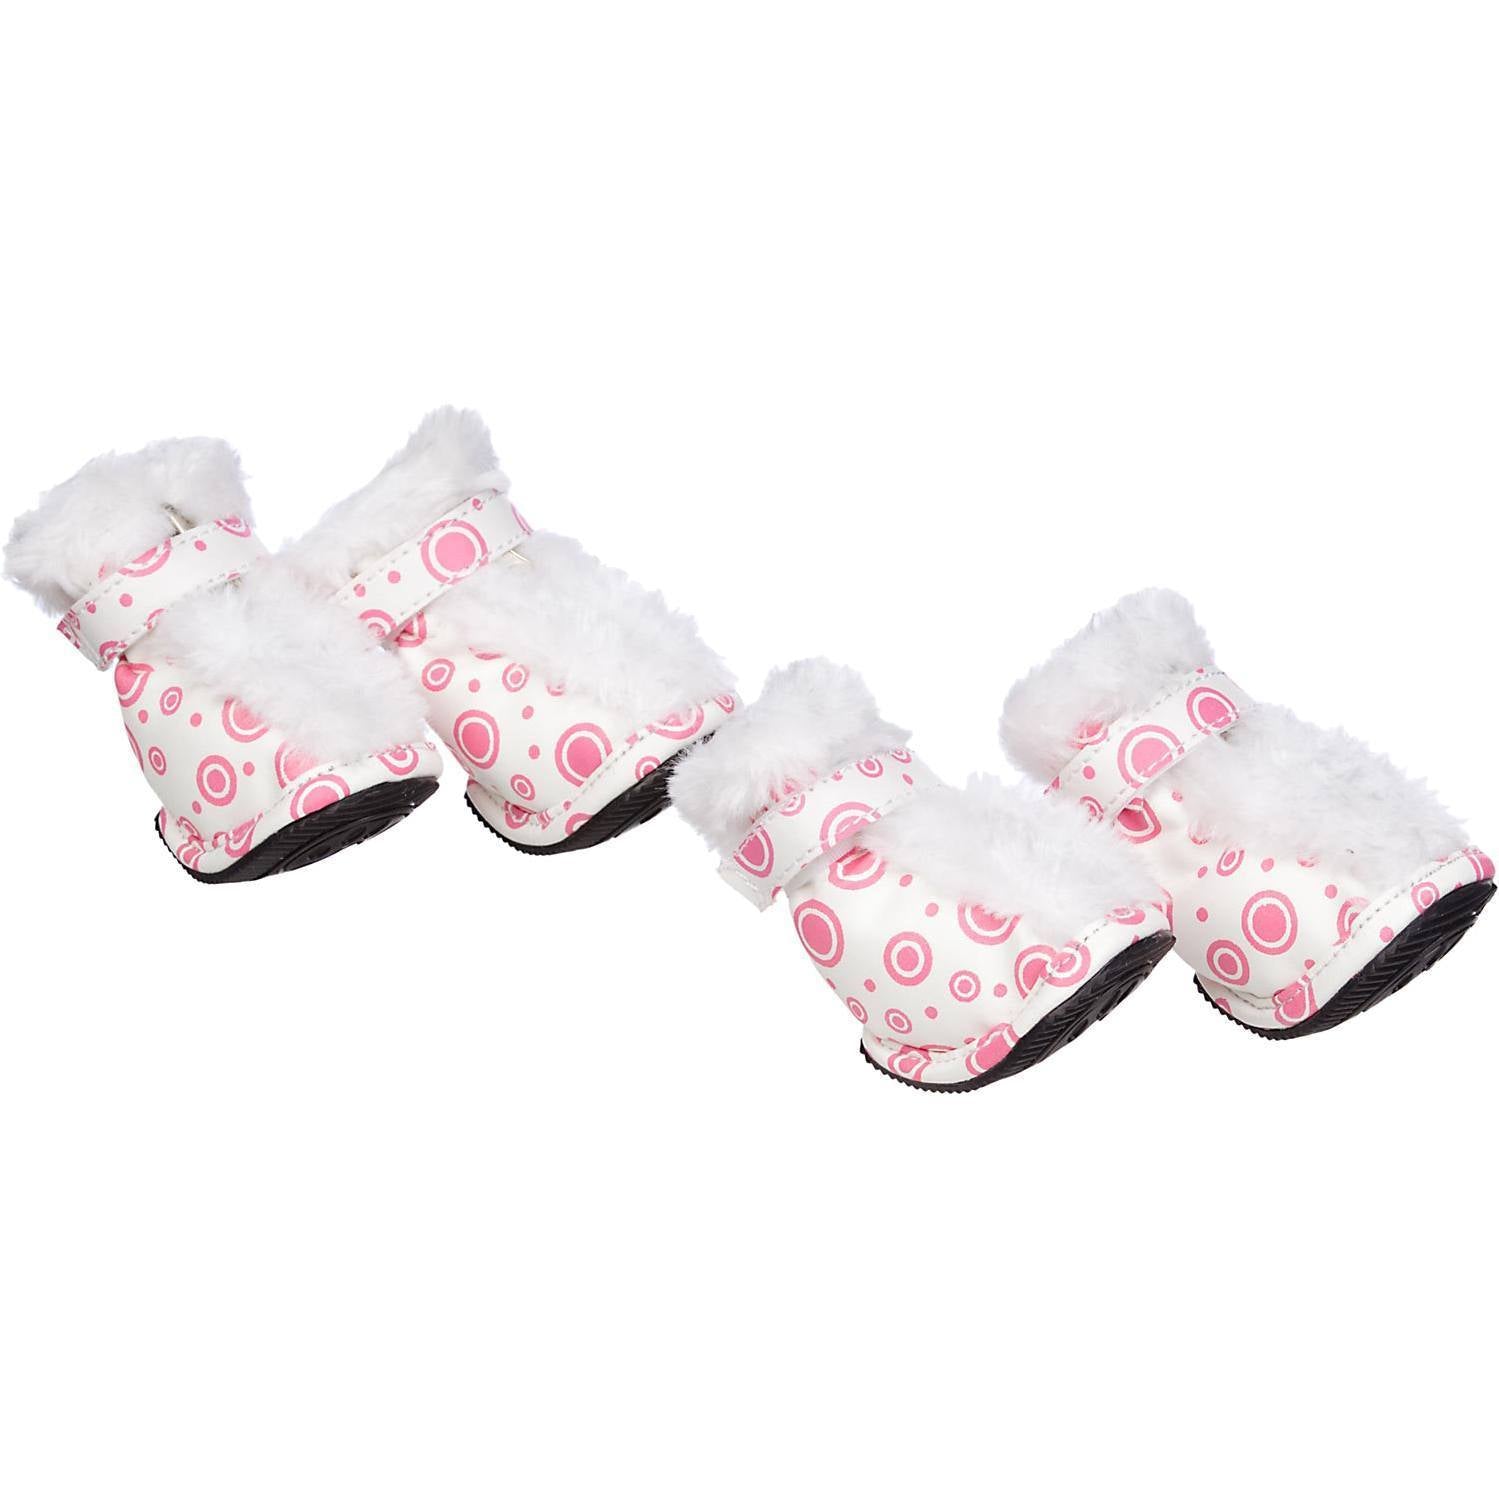 Pet Life ® Fur-Comfort 3M Insulated Fashion Fur and PVC Waterproof Winter Dog Boots - Set of 4 X-Small Pink & White